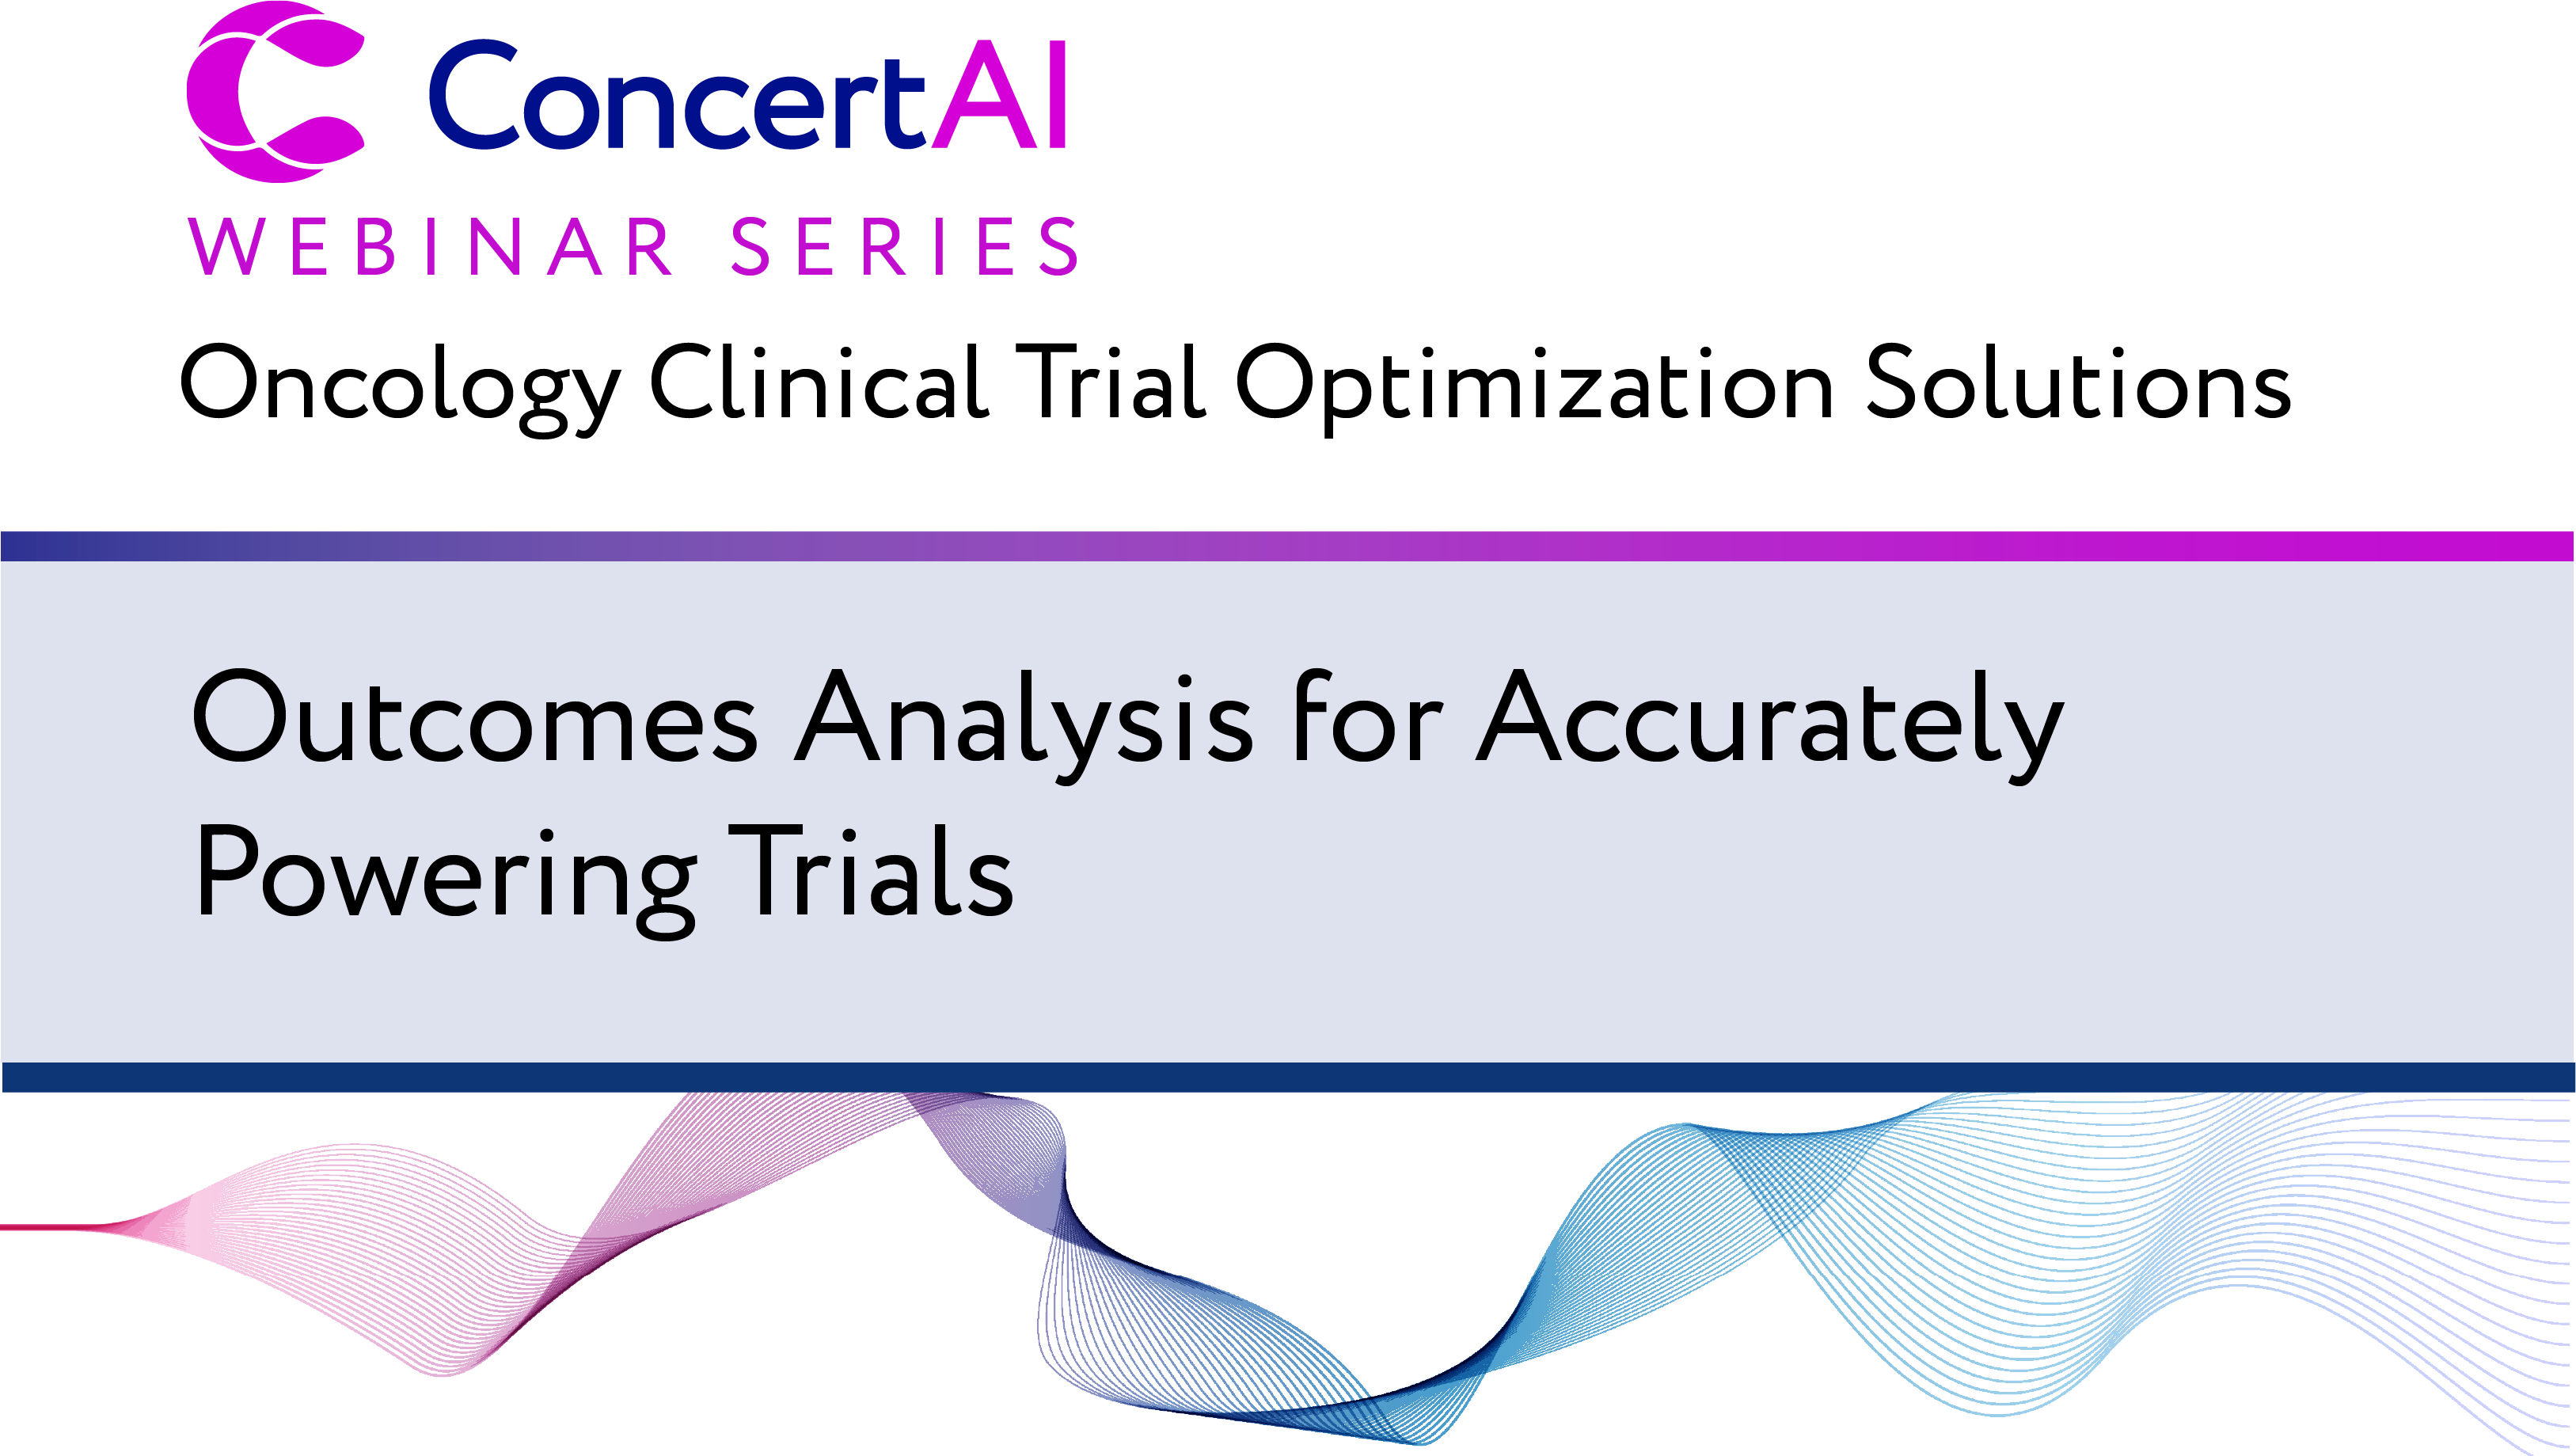 Outcomes Analyses for Accurately Powering Trials